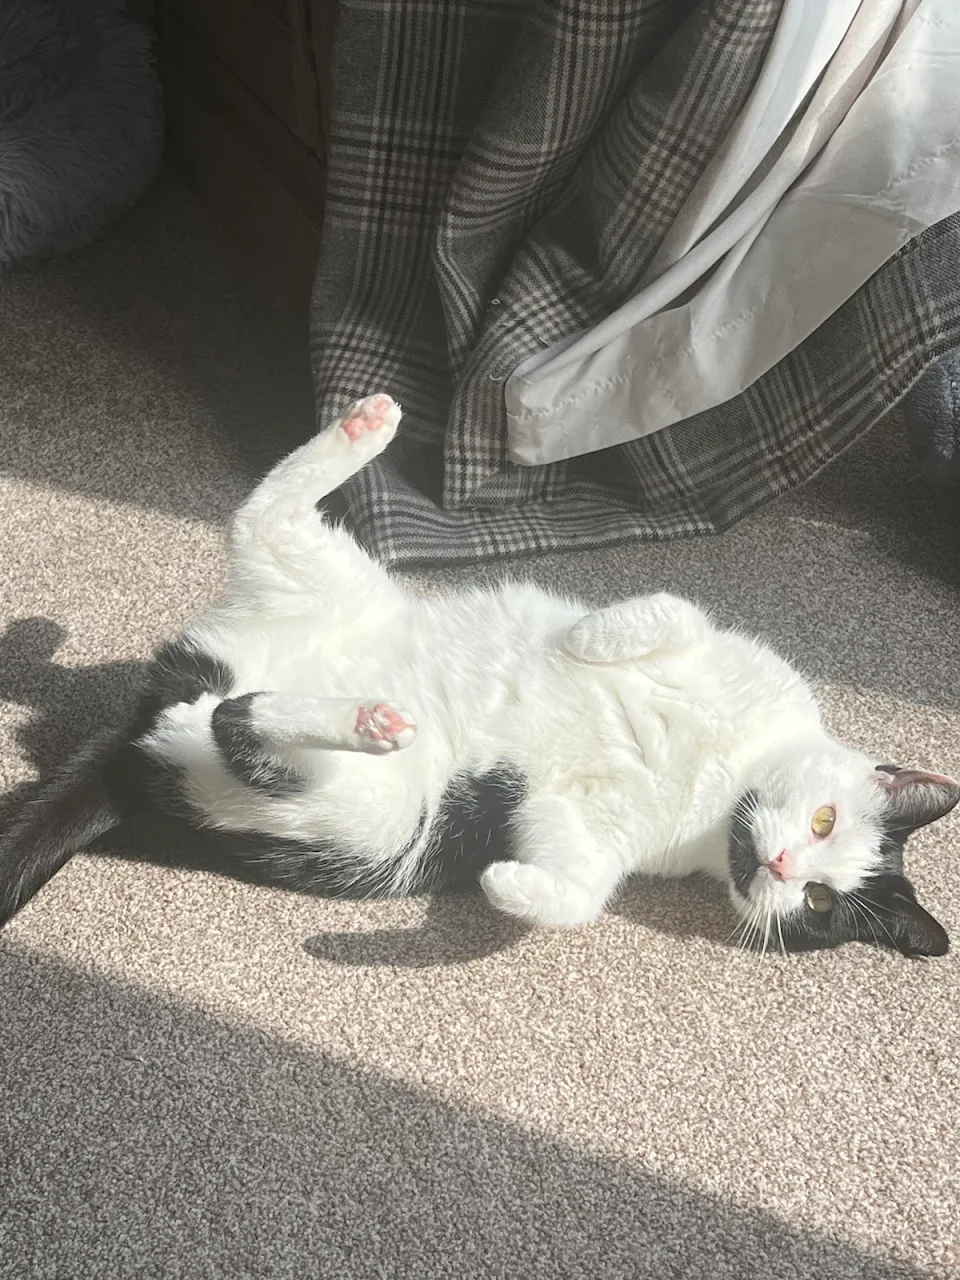 Sun’s out, tums out